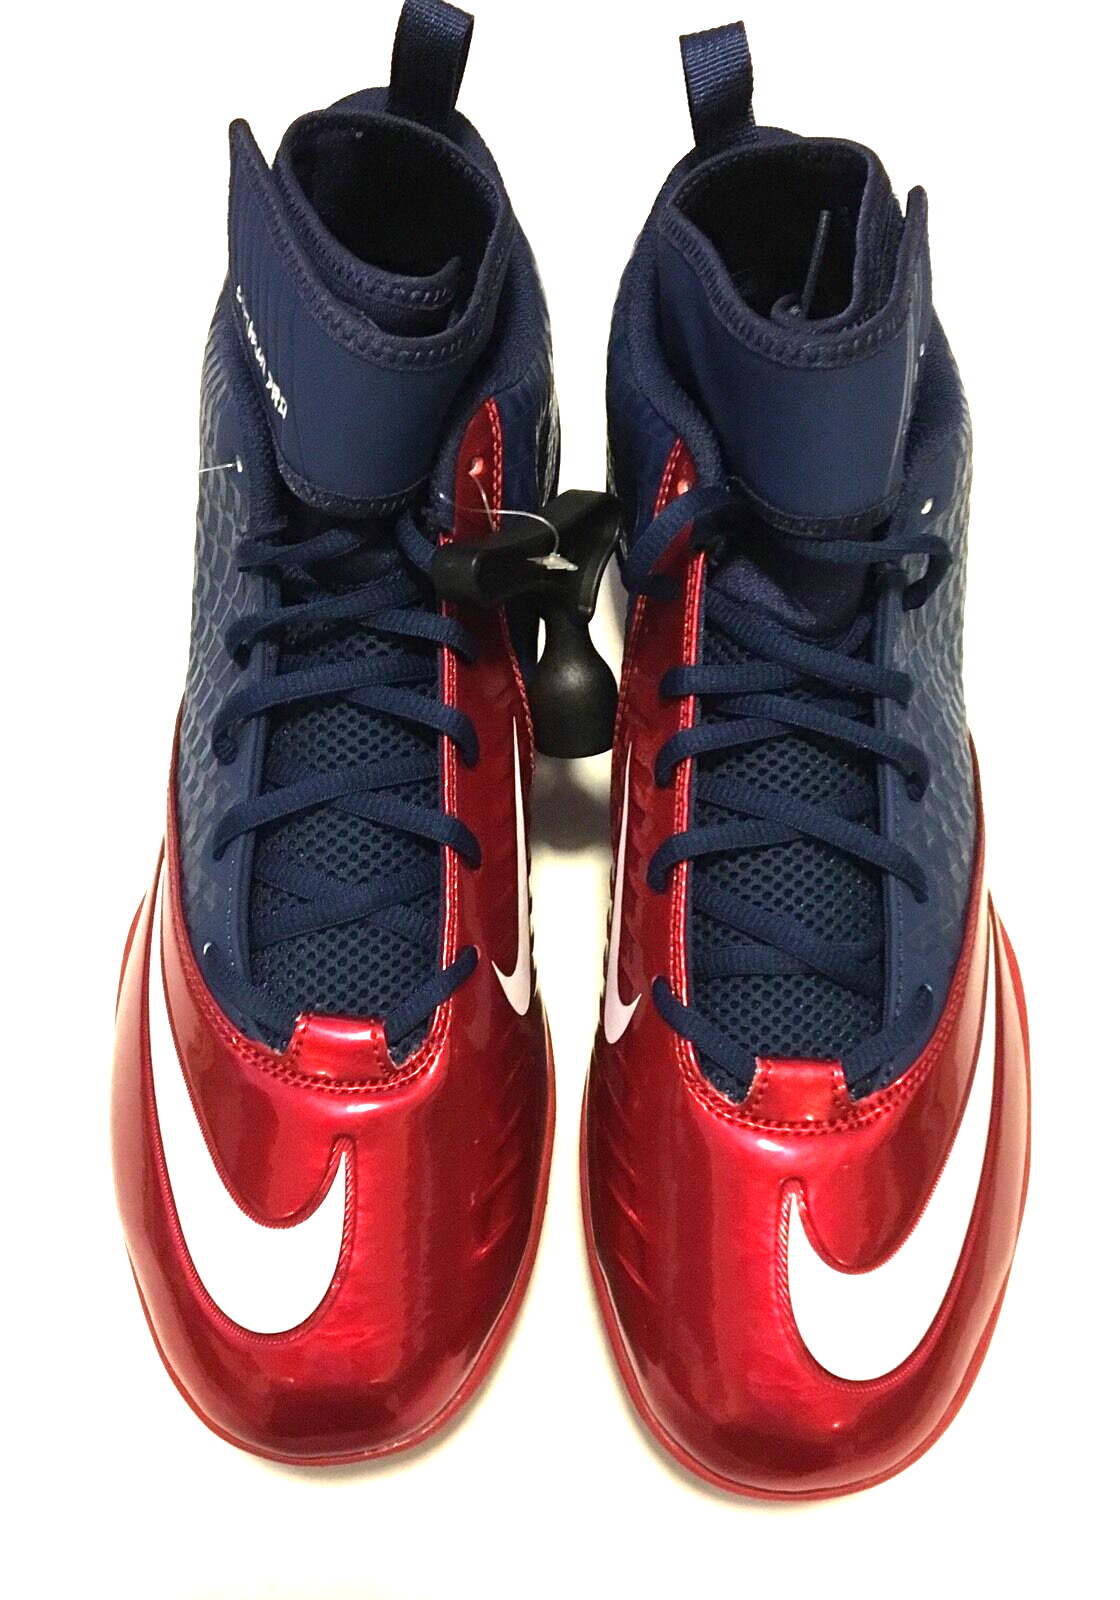 Primary image for NIKE SUPERBAD  LUNARLON PRO CLEATS 544762-413 NAVY RED MEN'S SZ 12.5 M RETAIL $$